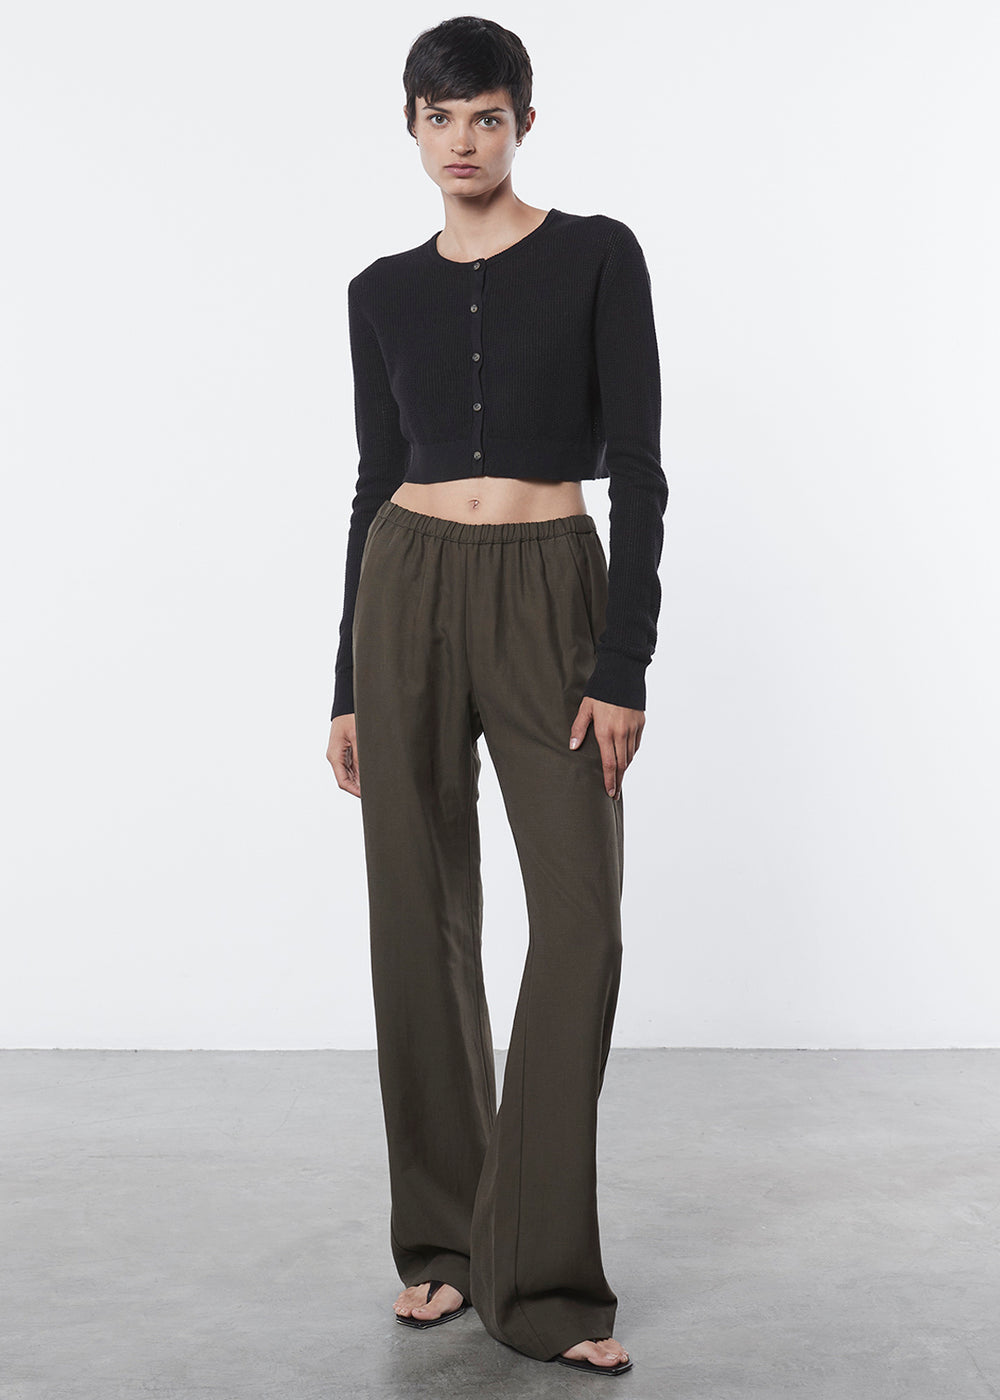 Enza Costa Twill Everywhere Pant Military-Pants-West of Woodward Boutique-Vancouver-Canada